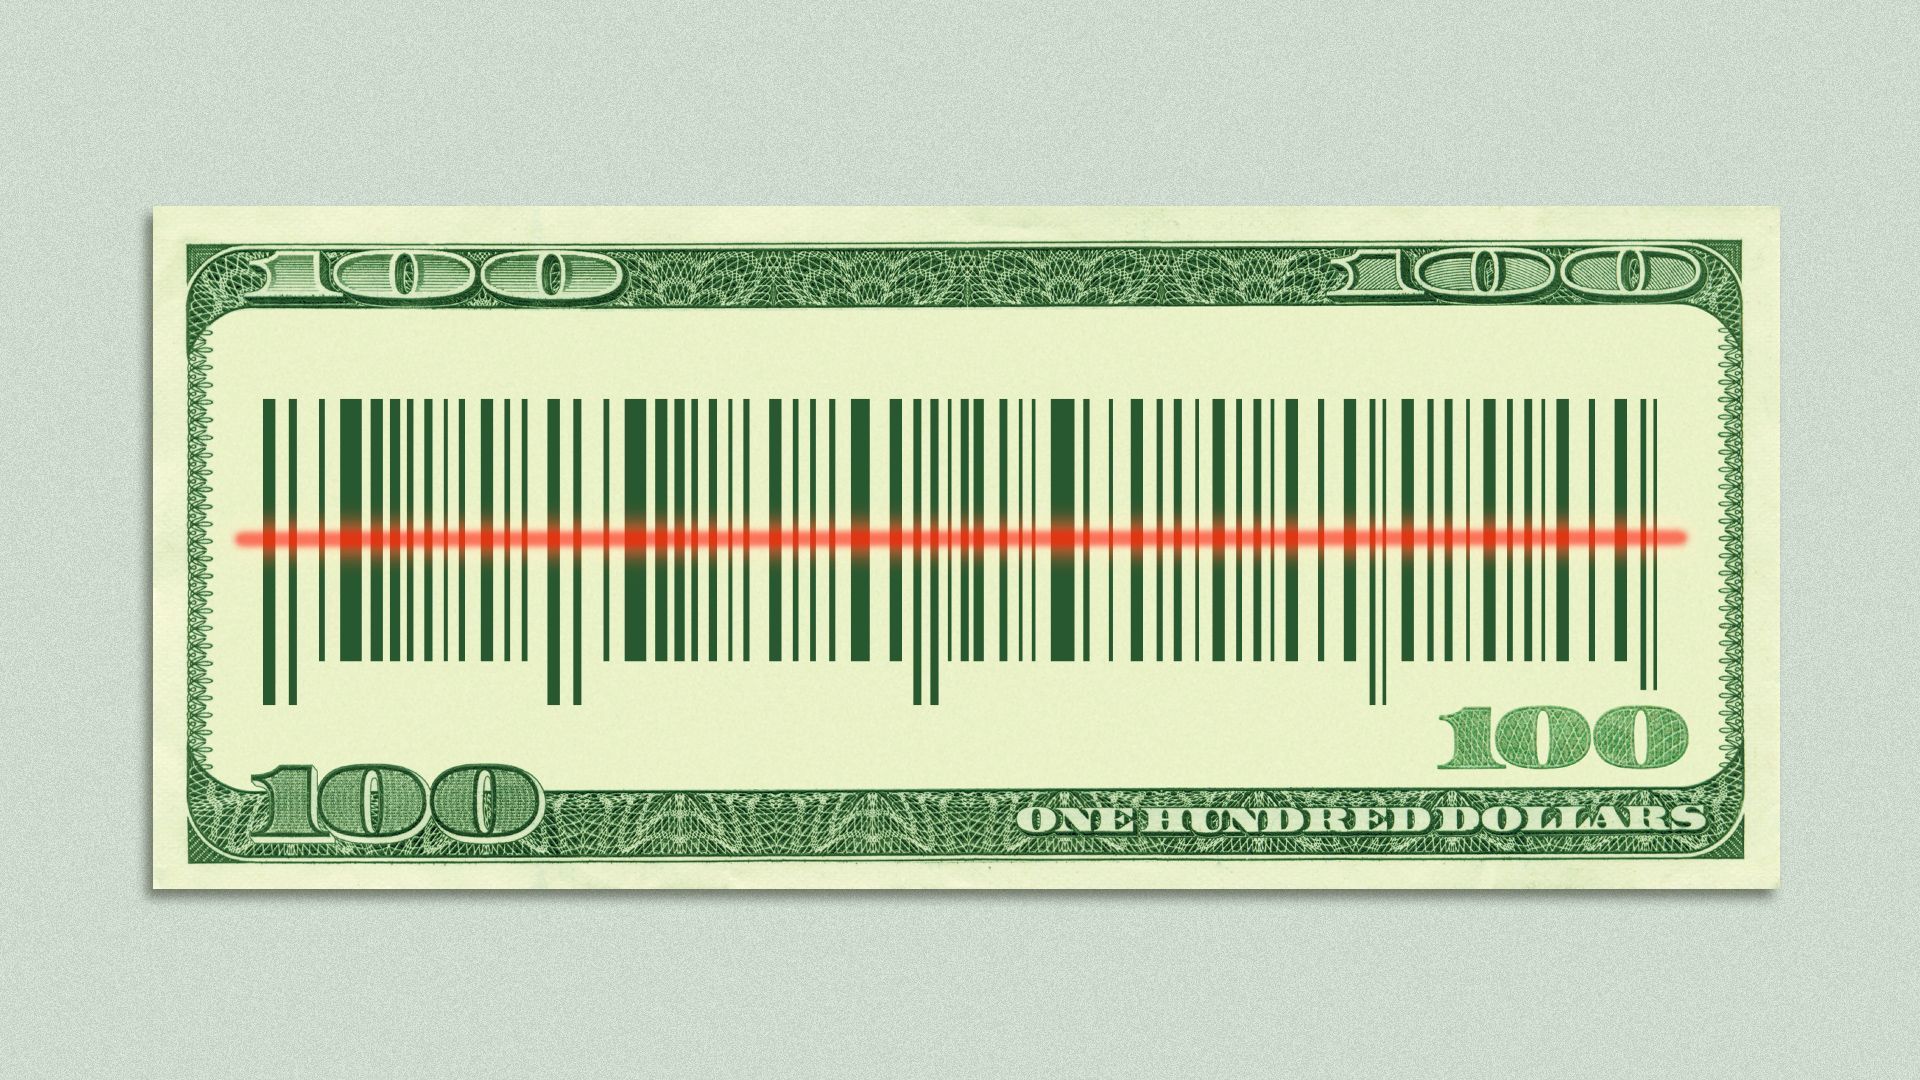 Illustration of a blank hundred dollar bill with a barcode running along the center of the bill. 